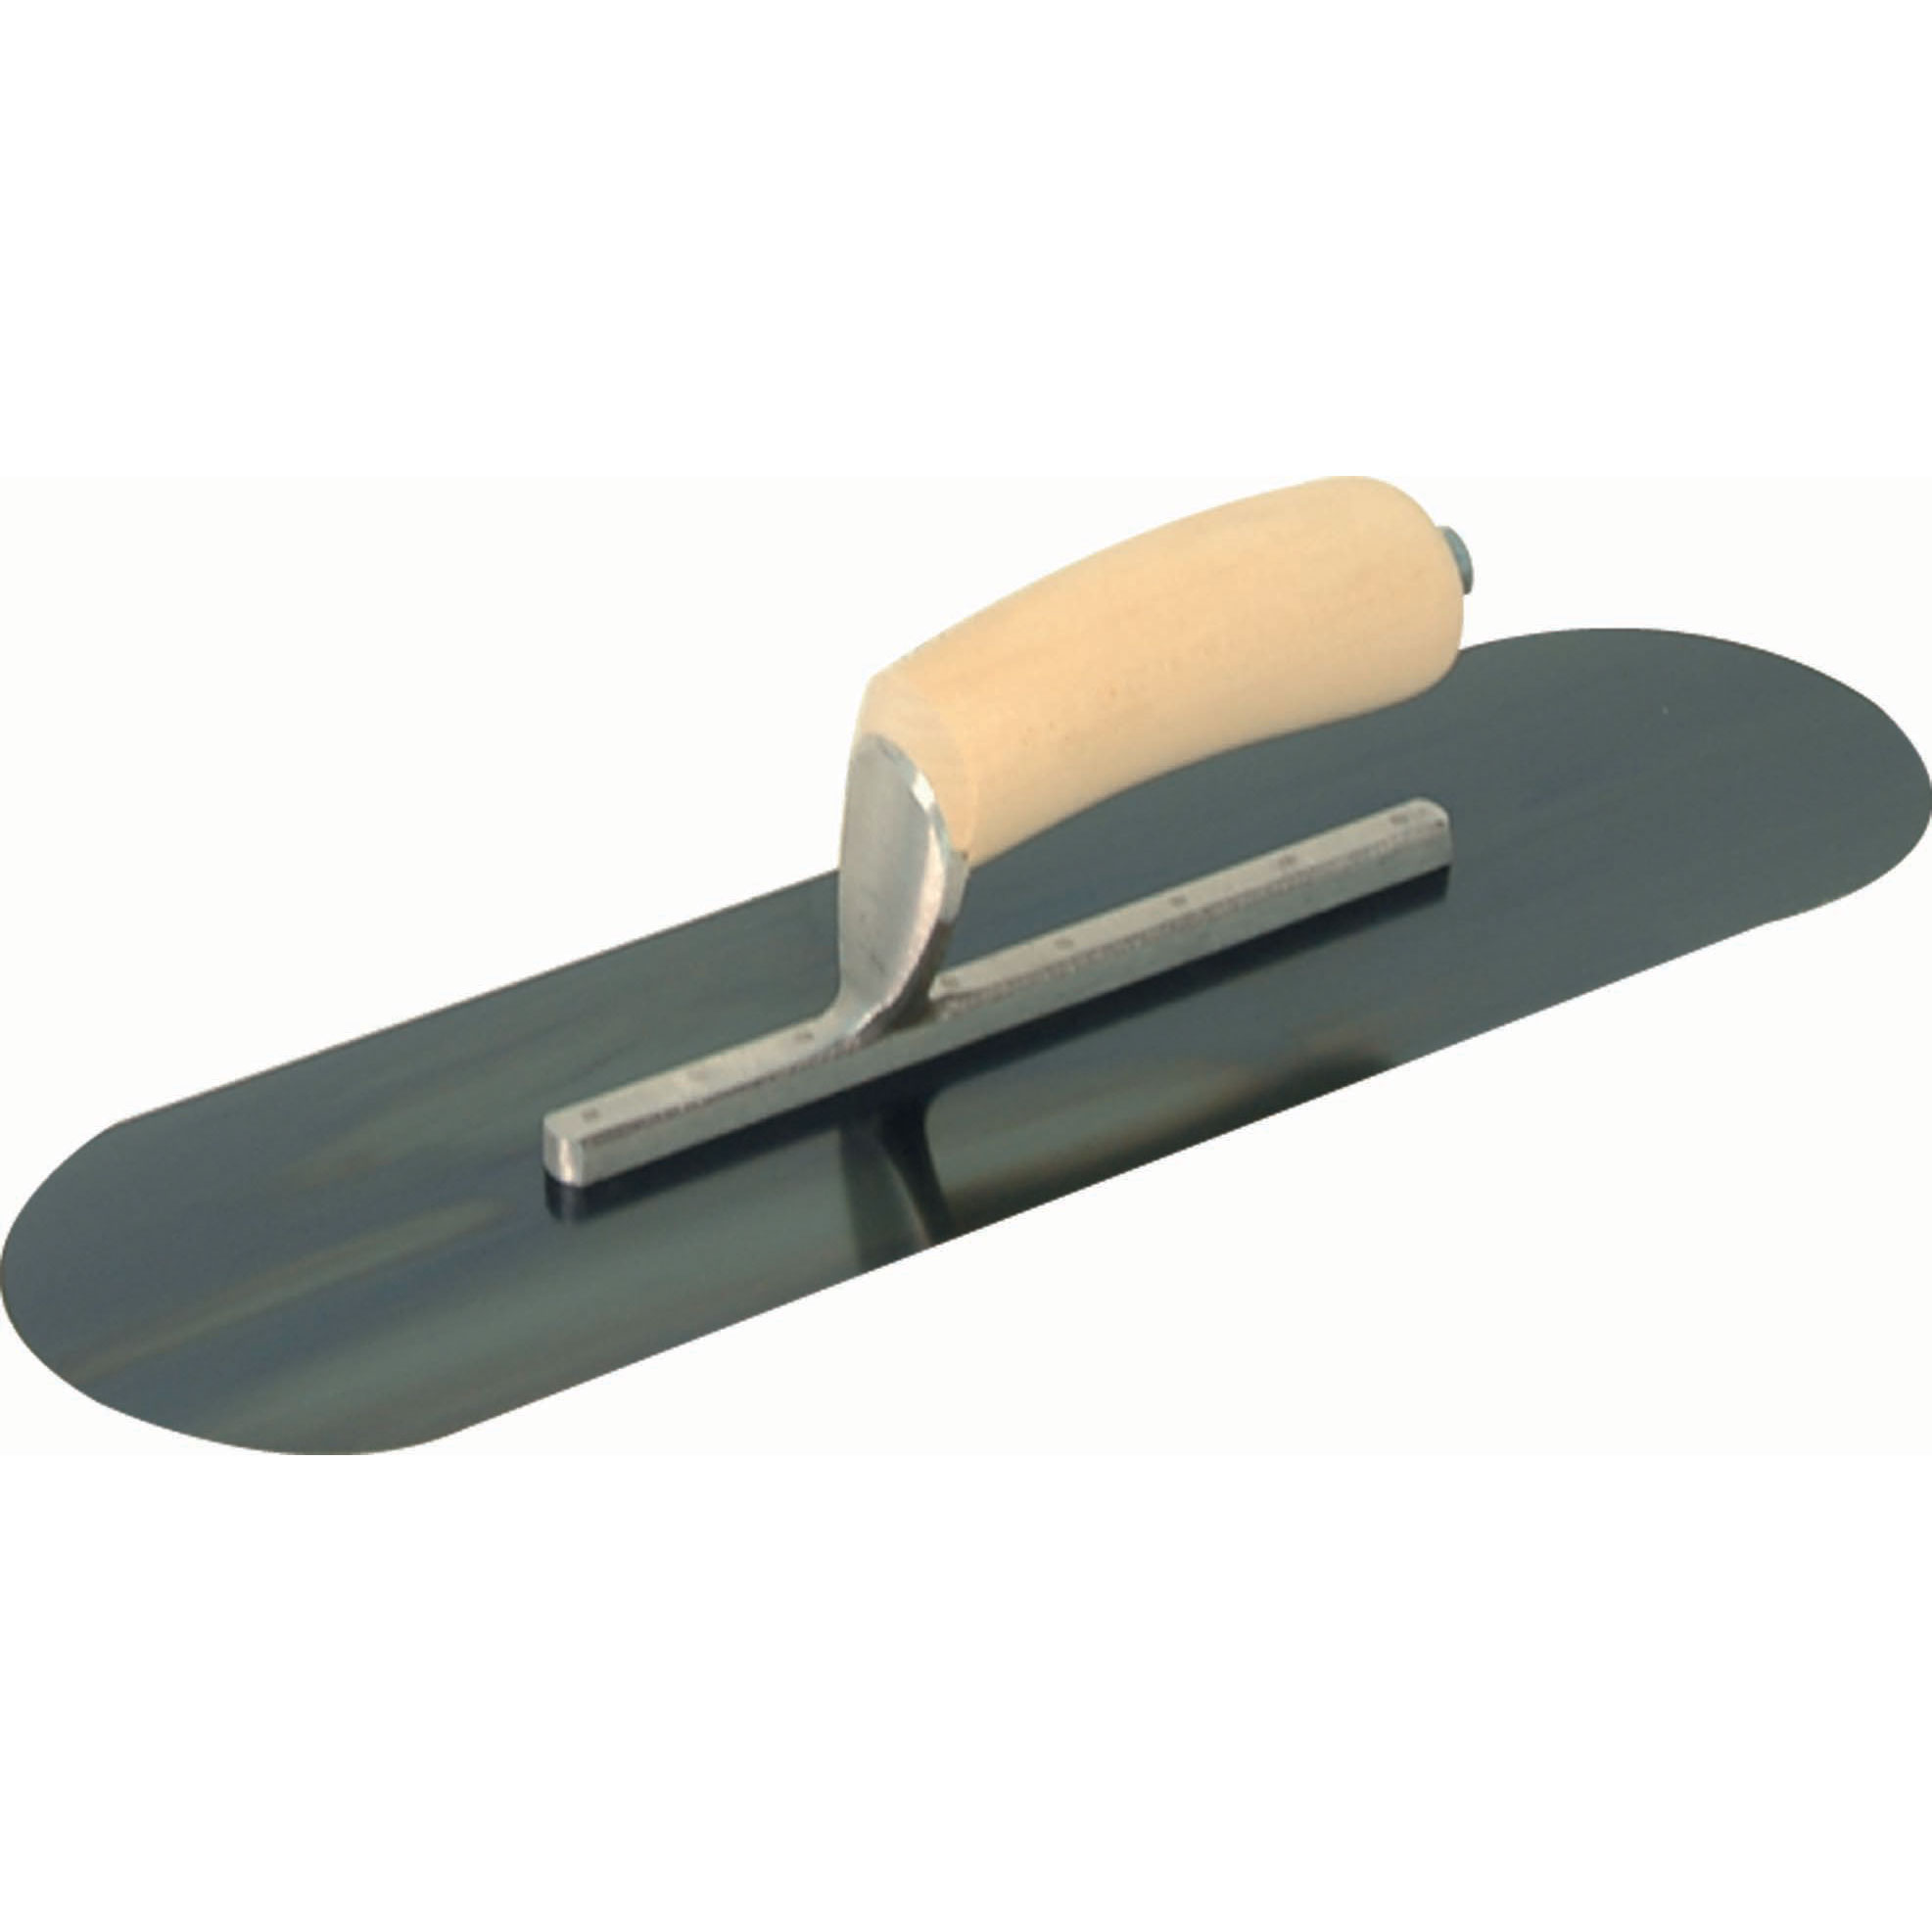 Marshalltown SP16BR8 16in x 4-1/2in Fully Rounded Trowel with Exposed Rivet Trowels and Wood Handle SP16BR8